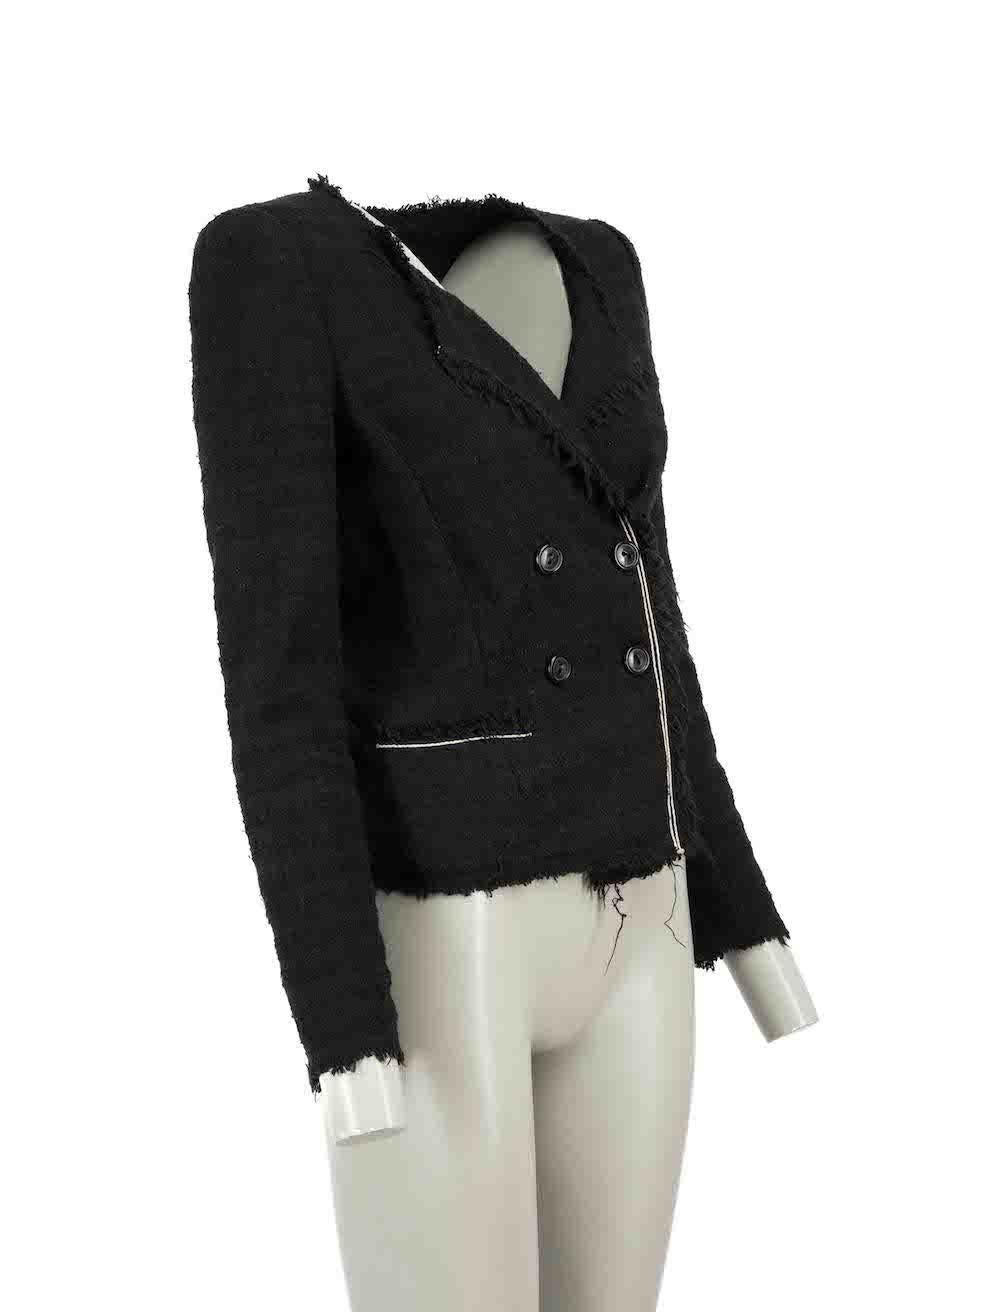 CONDITION is Good. Minor wear to jacket is evident. Light wear to fabric with a number of plucks to the weave, loose thread ends and pilling found throughout on this used Isabel Marant √âtoile designer resale item.
 
Details
Black
Cotton
Tweed